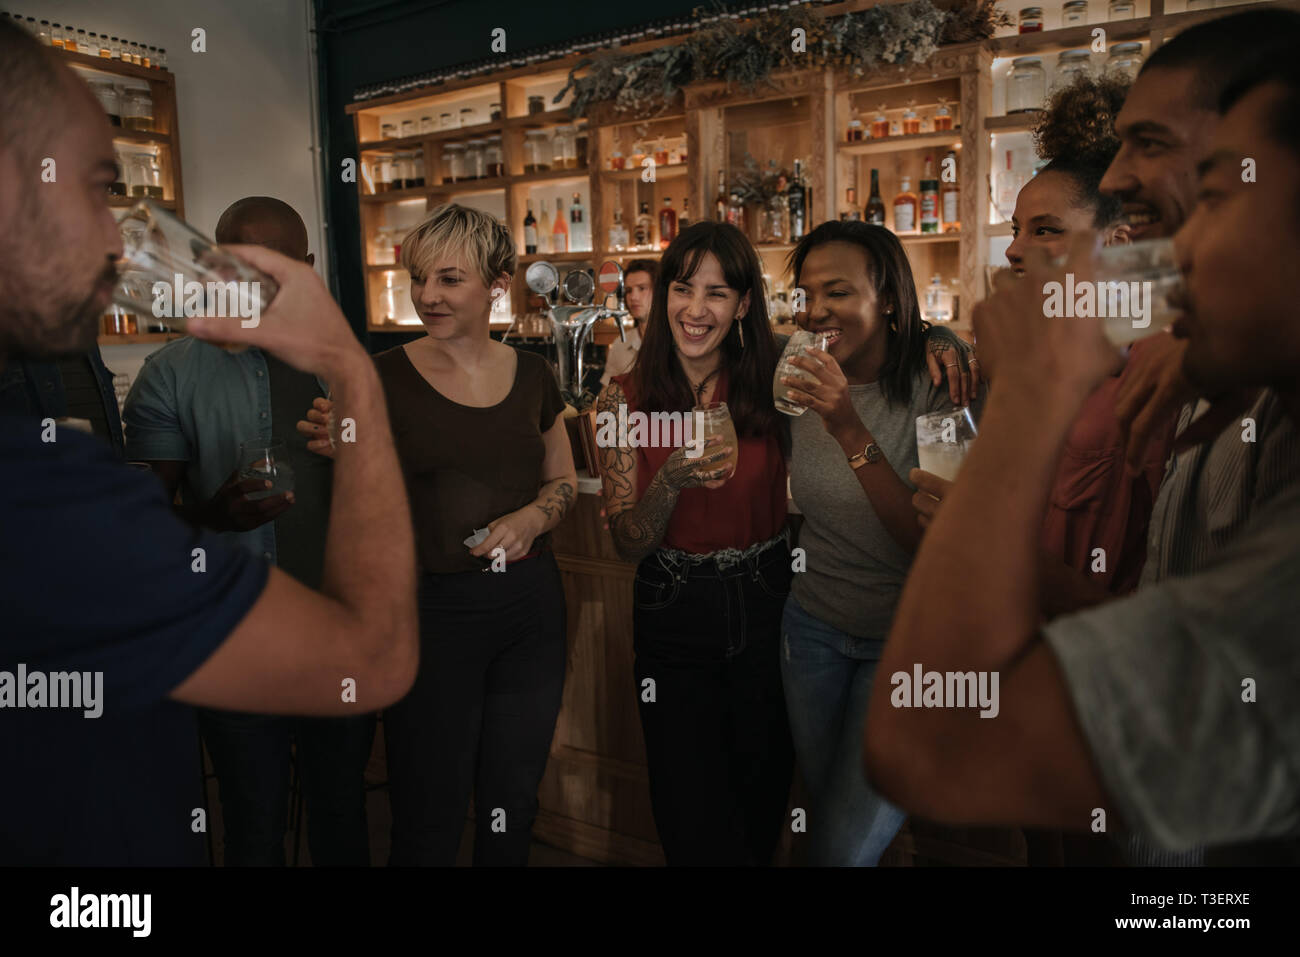 Friends drinking and talking together in a bar at night Stock Photo